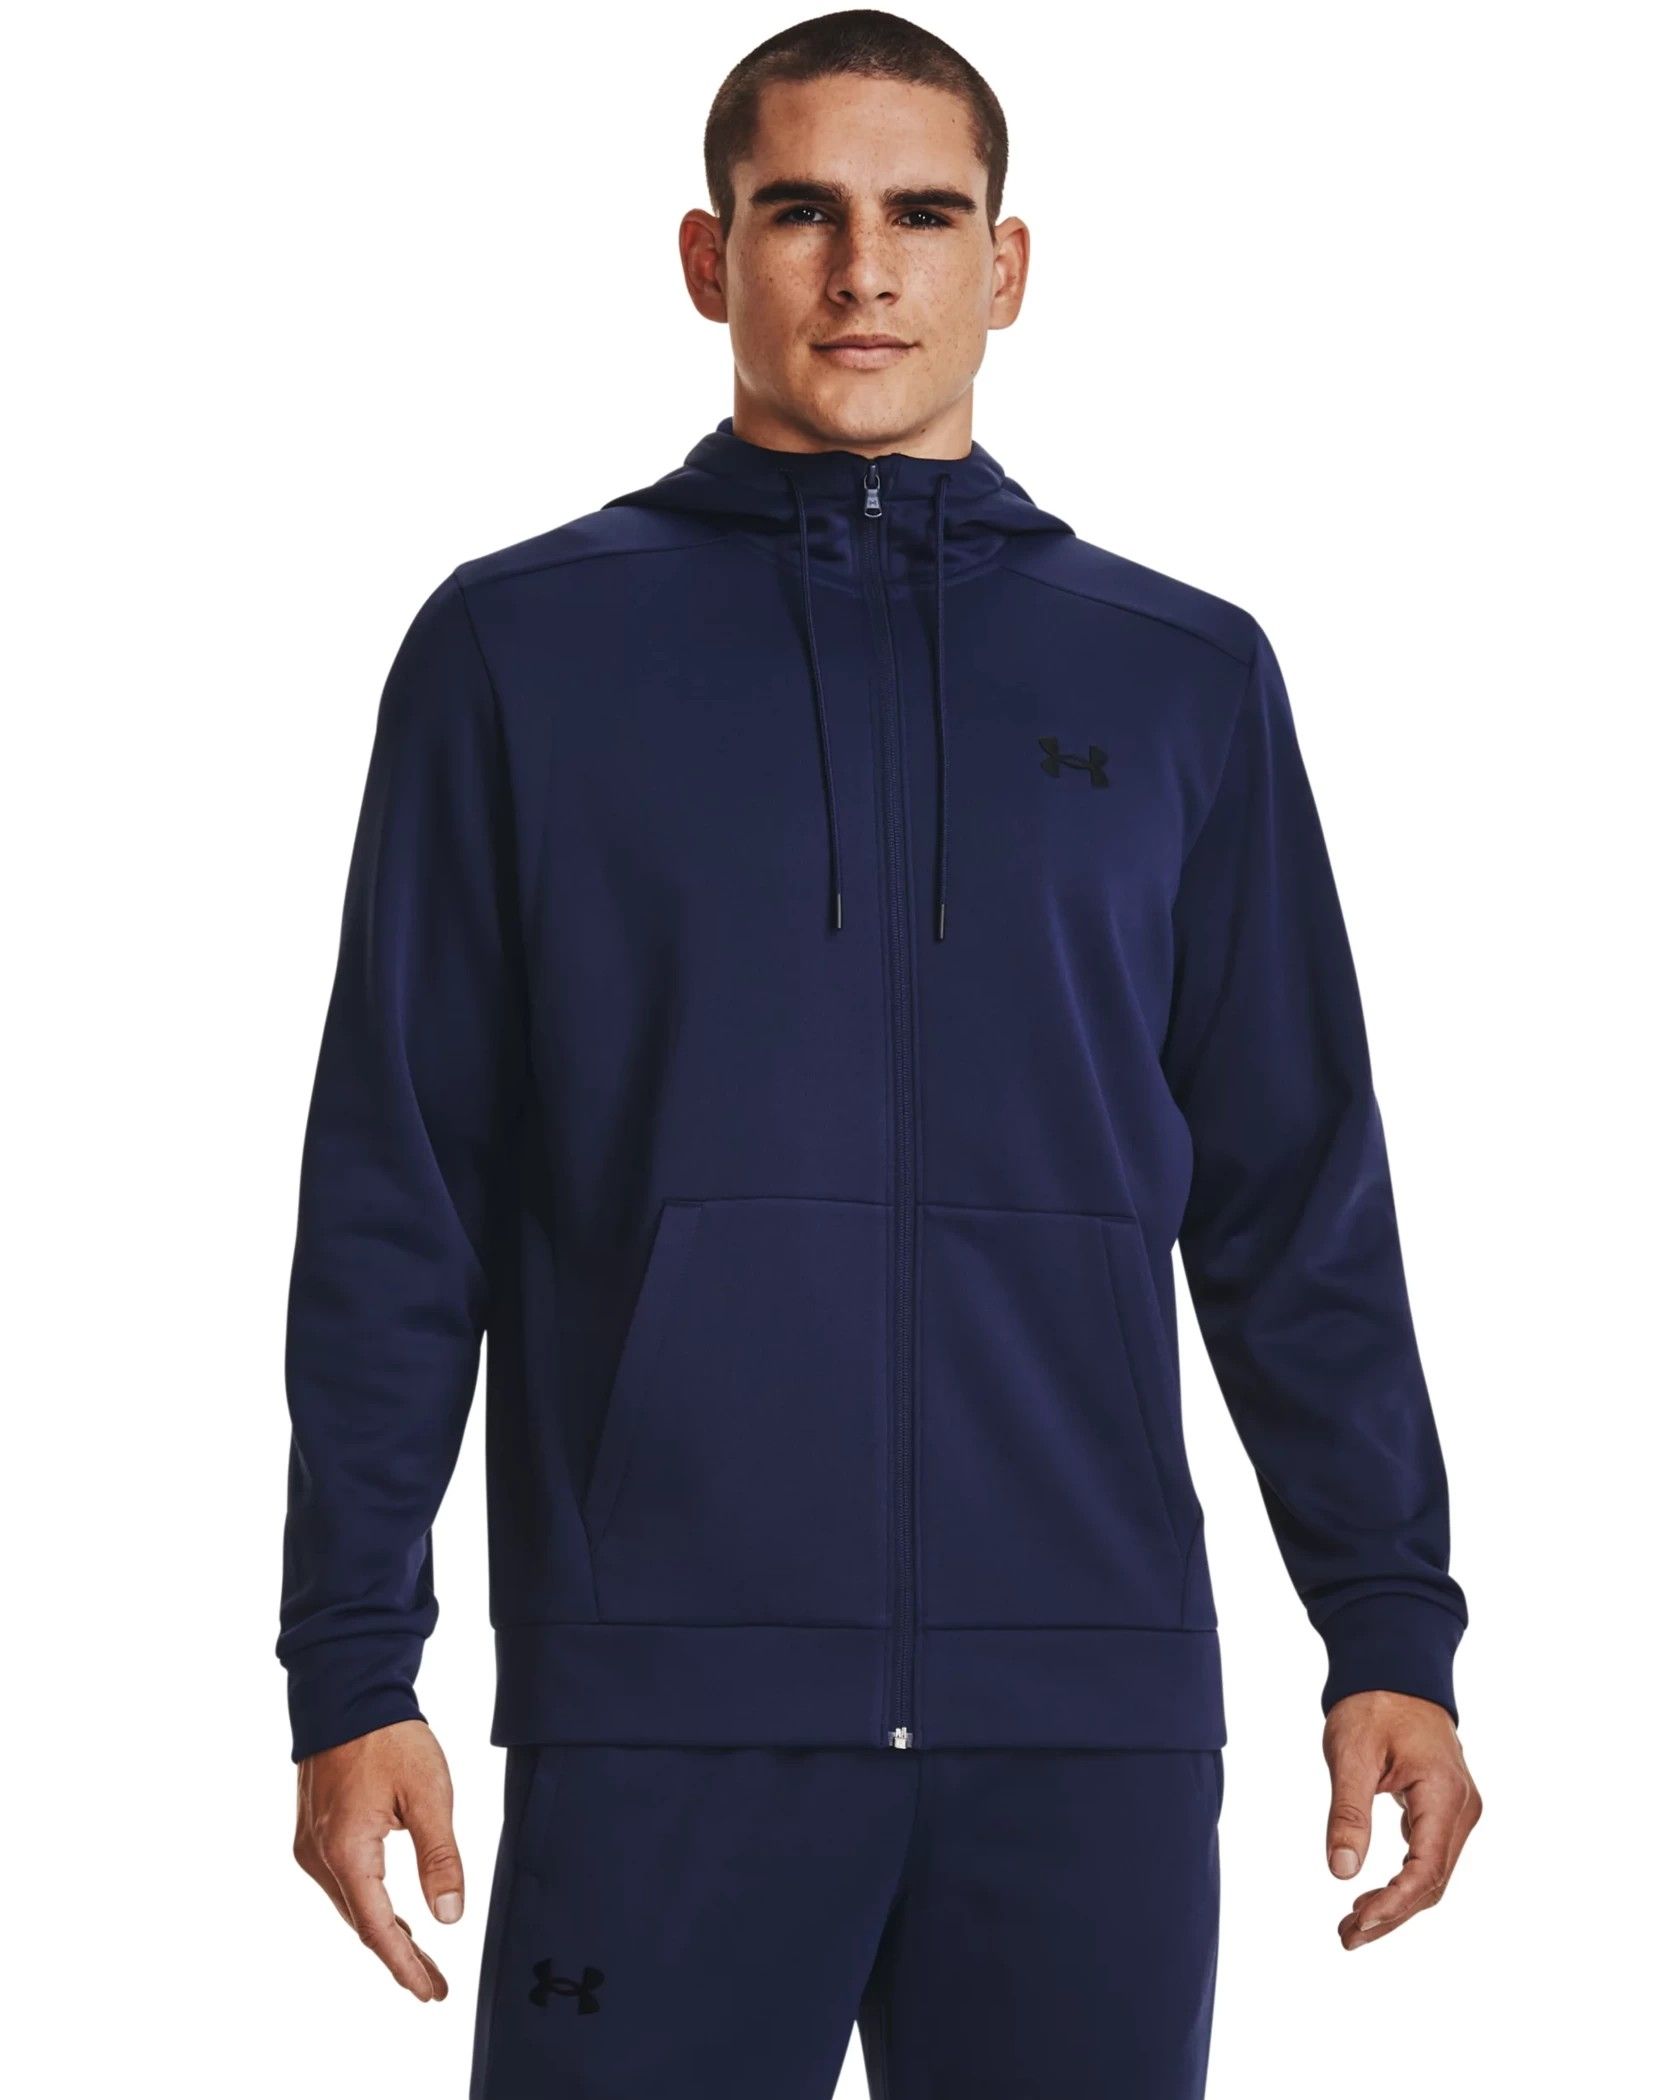 Order Online UA Armour Fleece Full-Zip Hoodie From Under Armour India